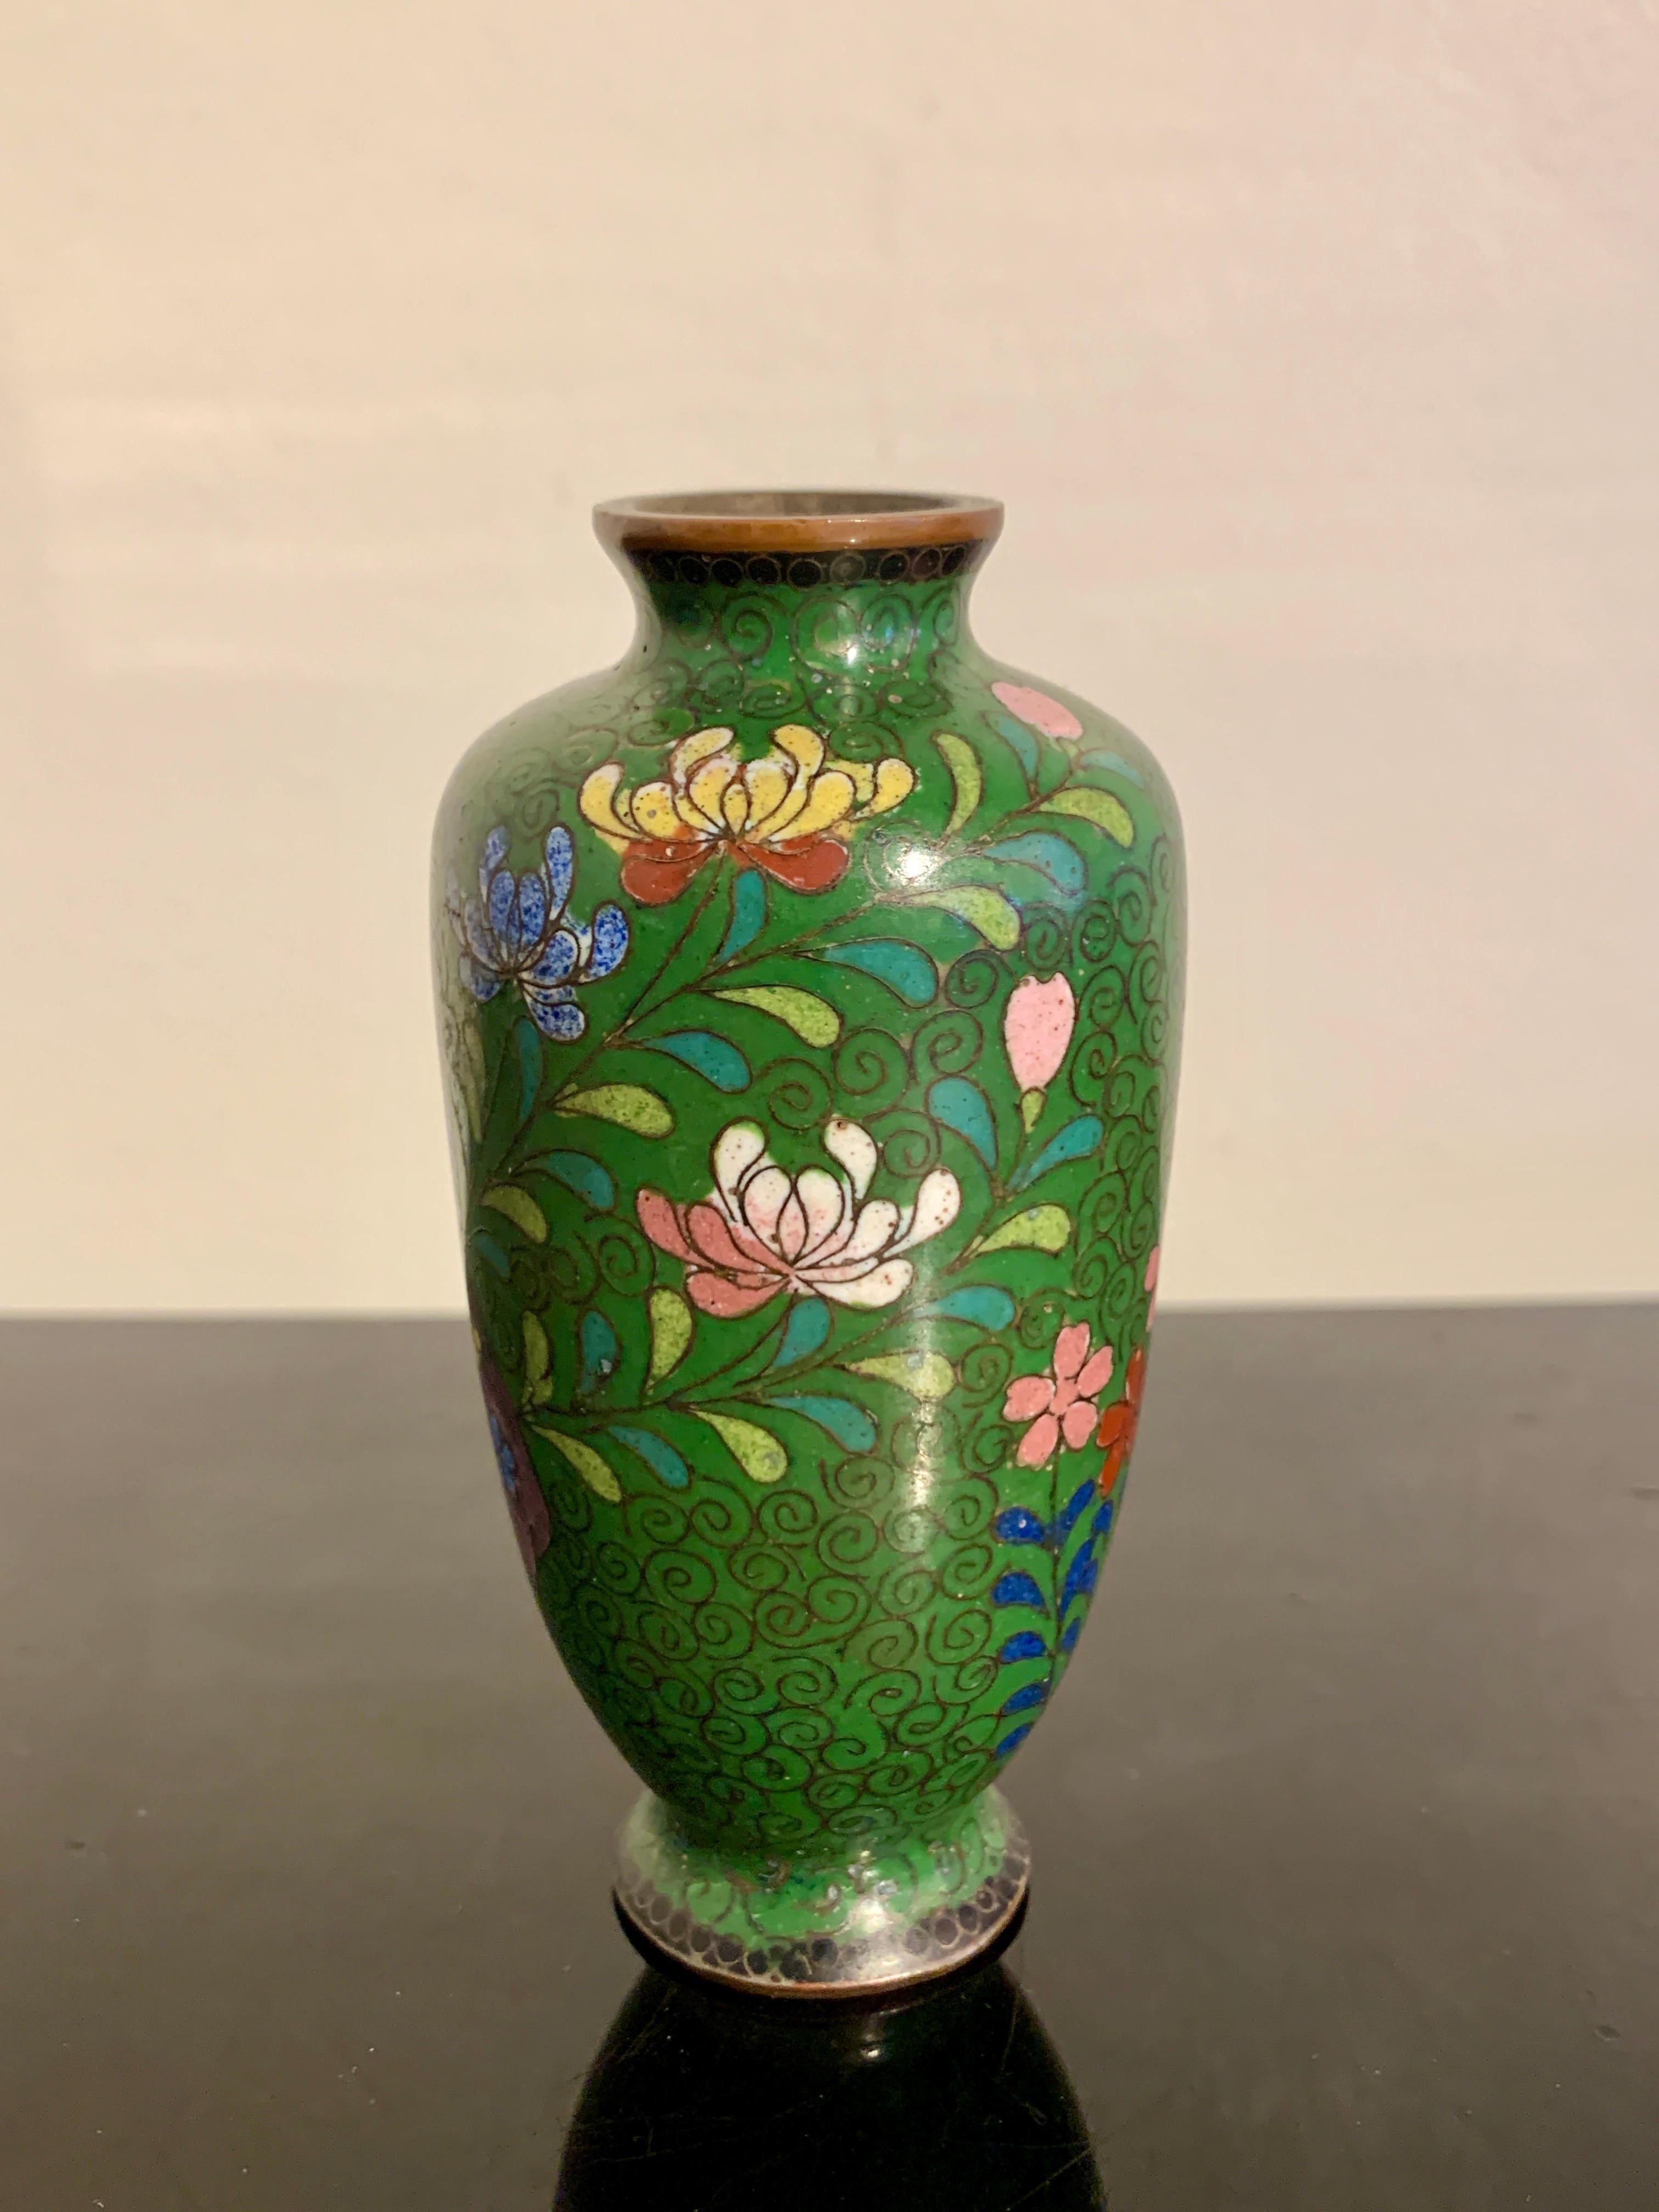 Group of Five Small Japanese Cloisonne Vases, Meiji Period, Early 20th C, Japan 1